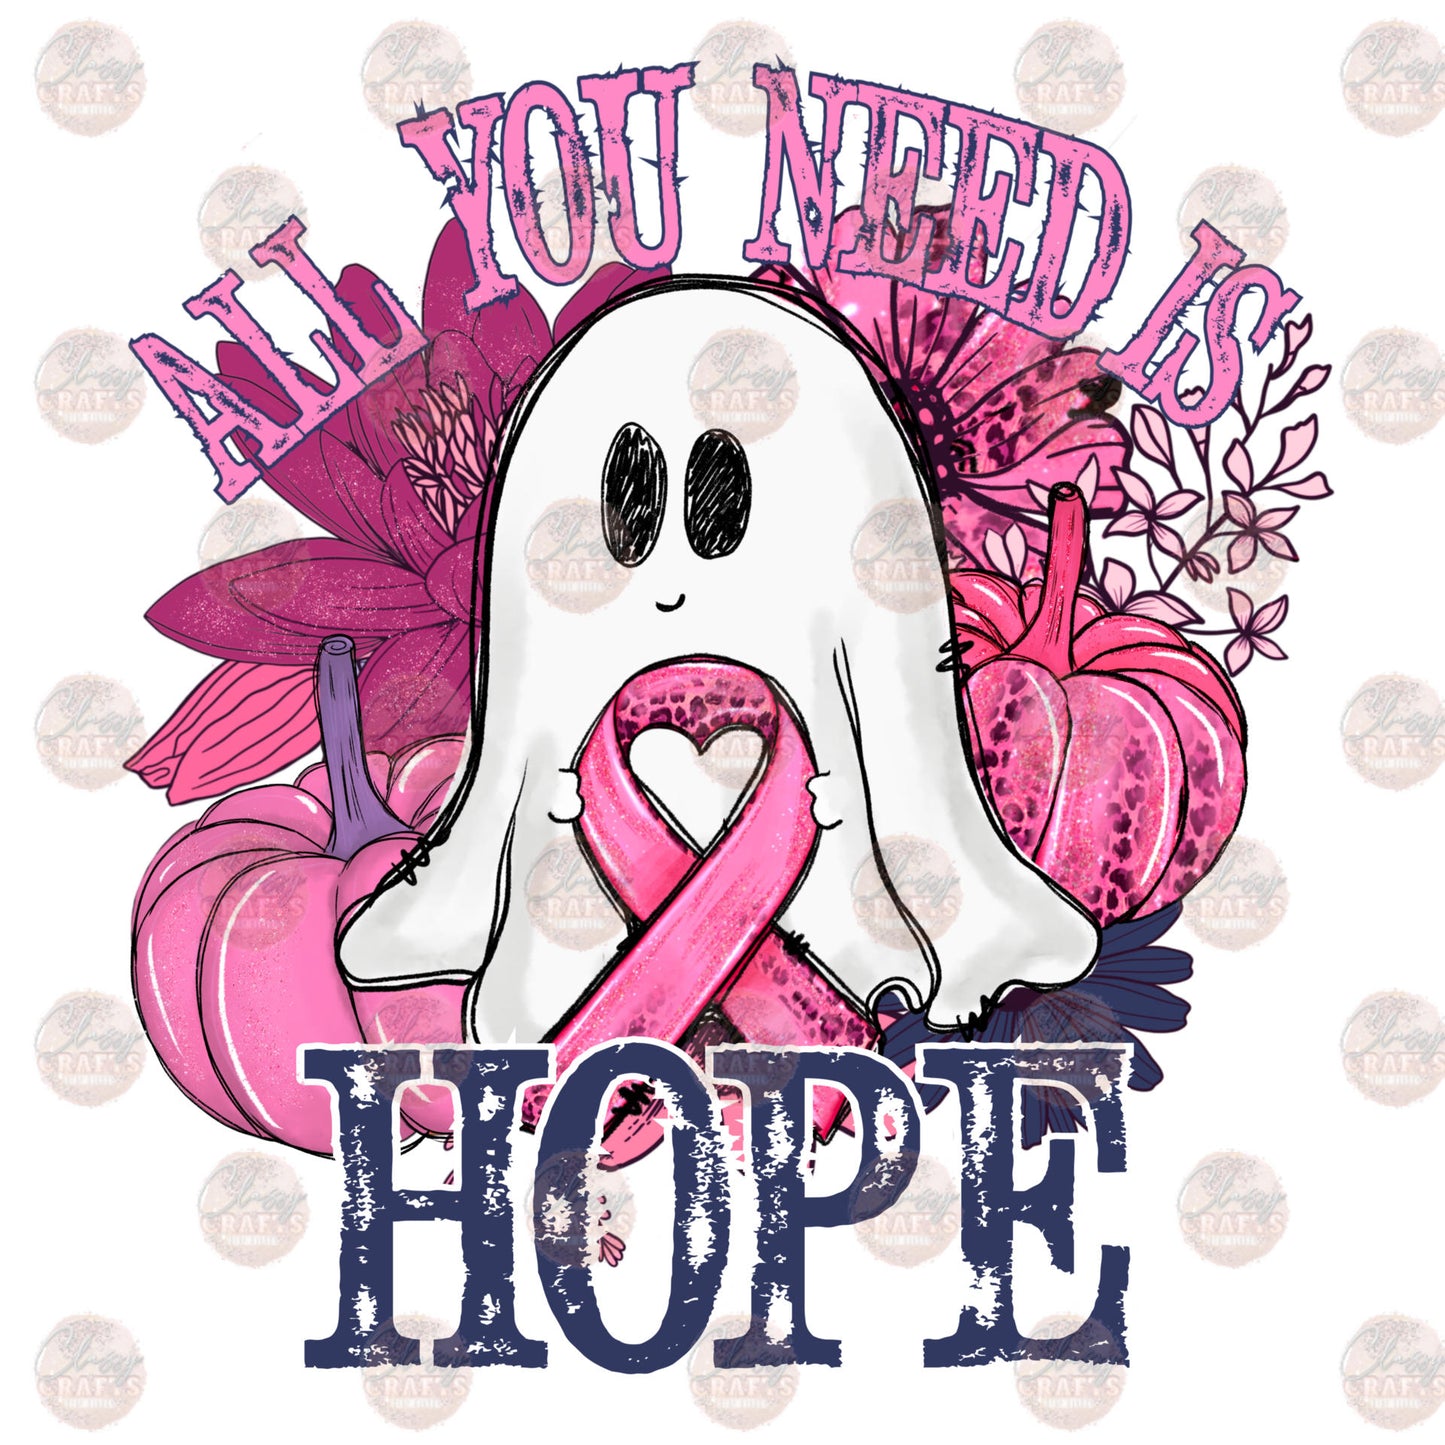 All You Need Is Hope - Sublimation Transfer